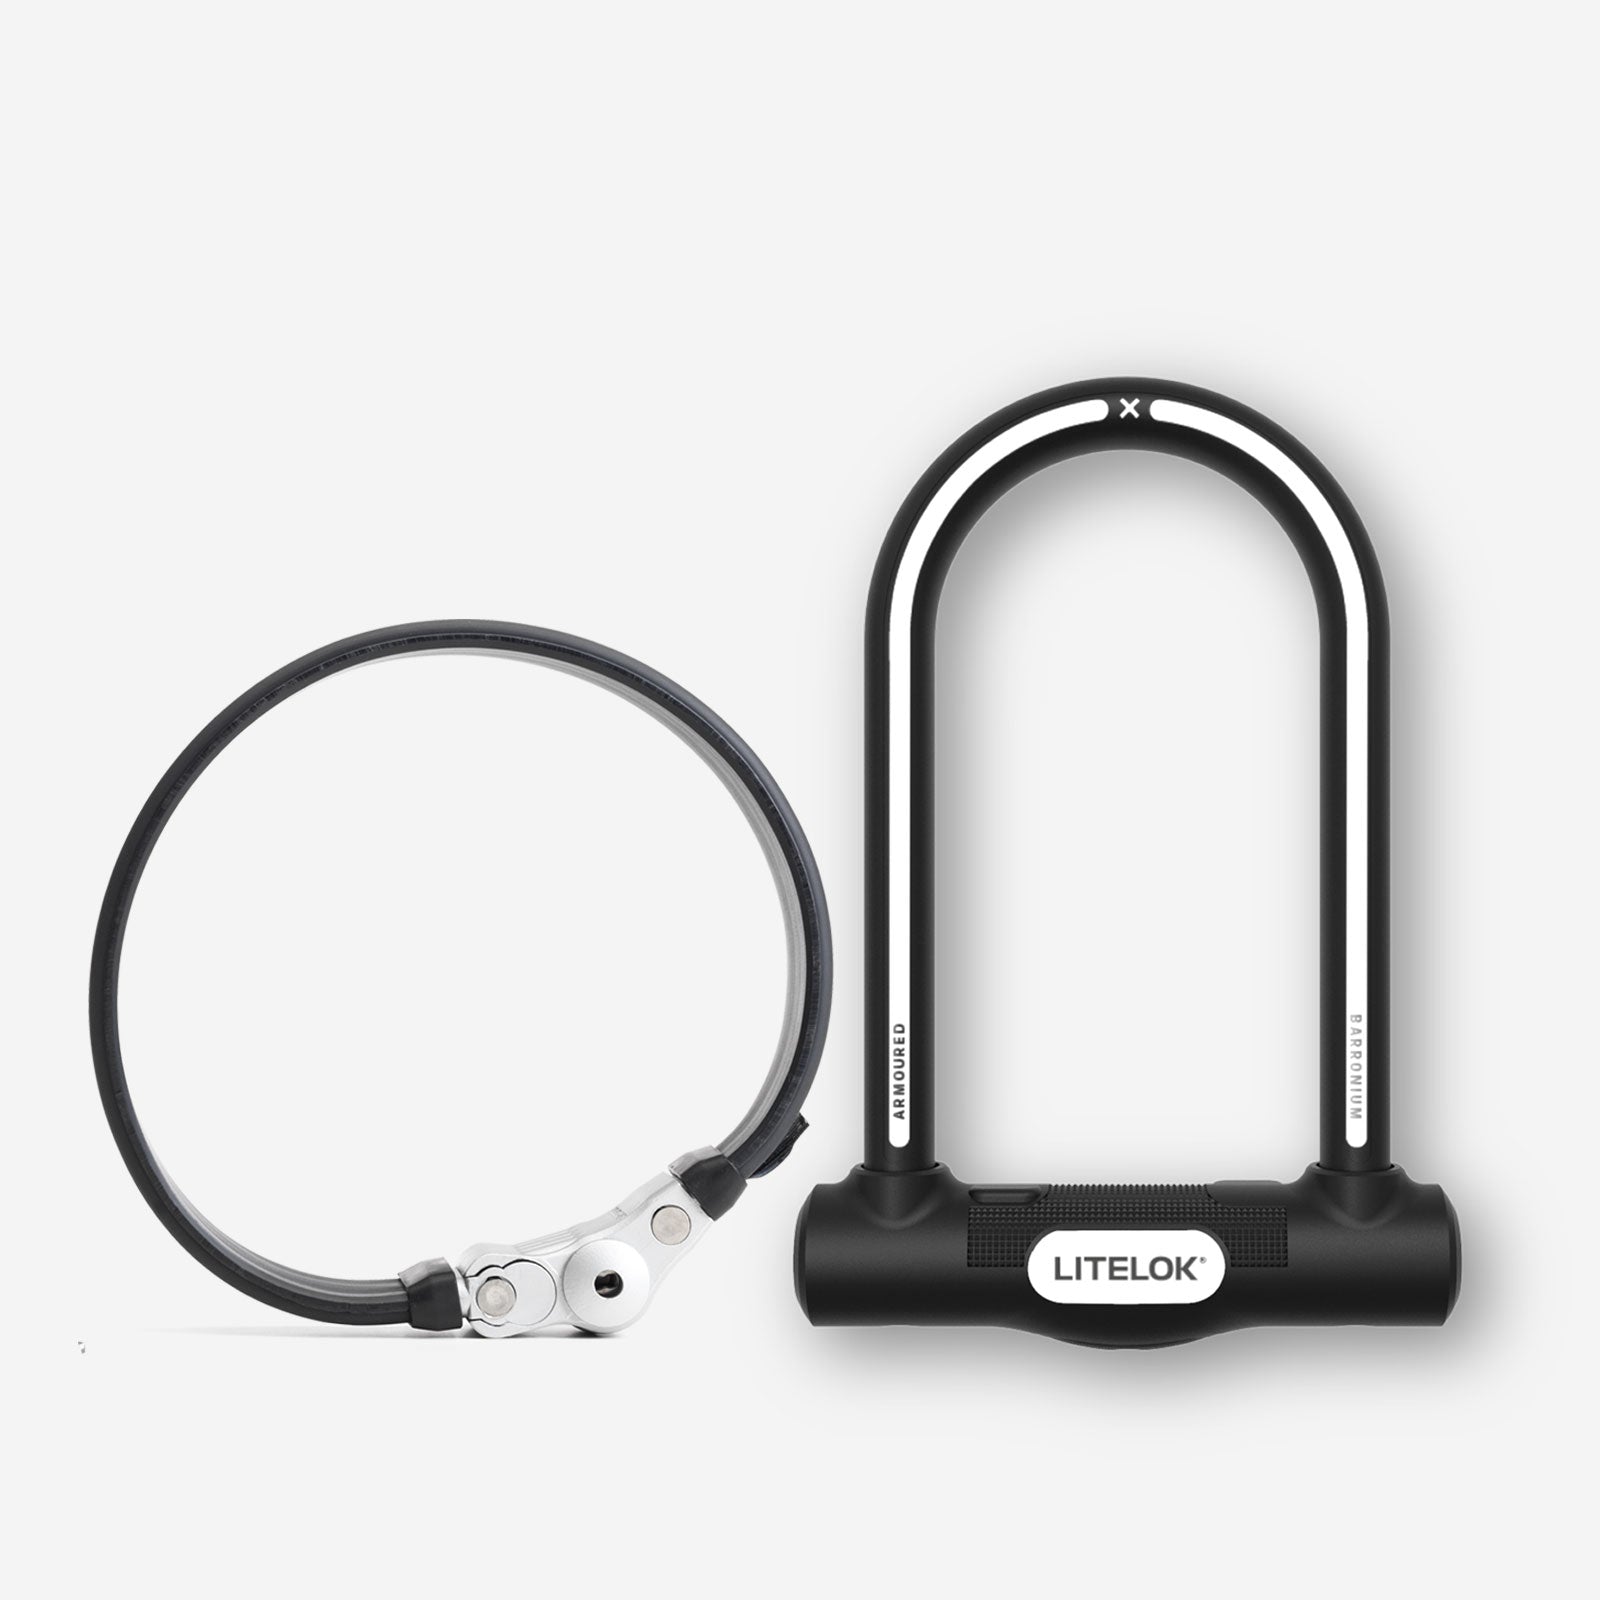 Supreme Scooter Security Bundle - X1 and GO Flexi-O 52